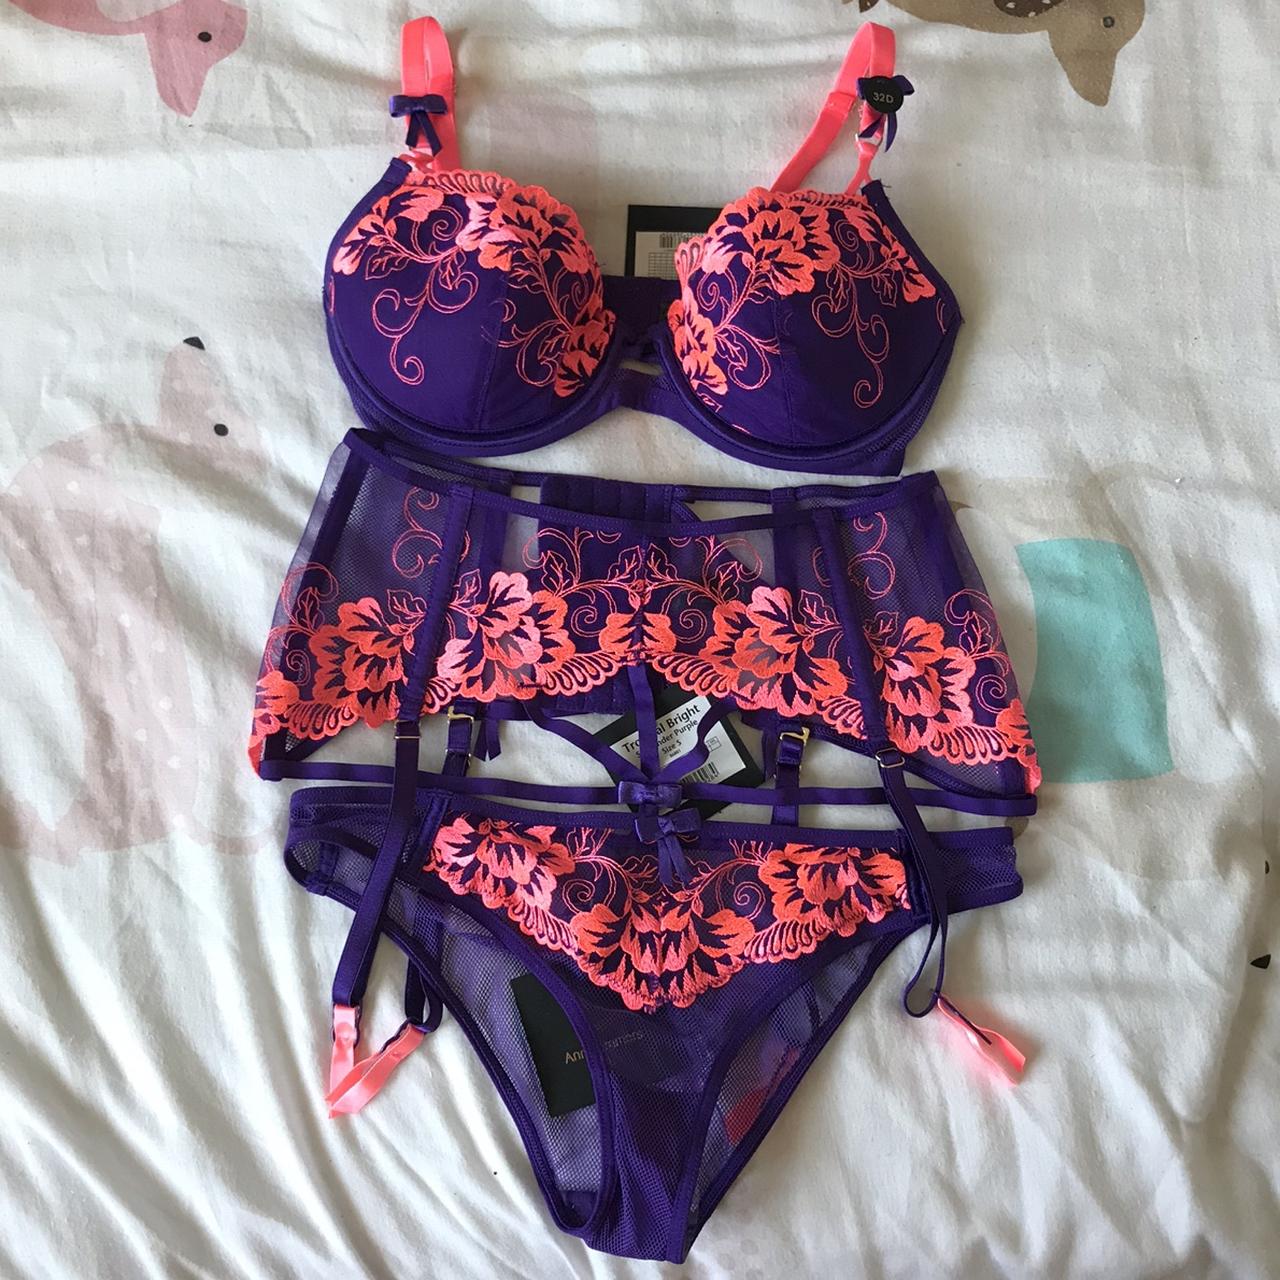 PURPLE and NEON PINK PATTERNED LINGERIE SET by ANN - Depop